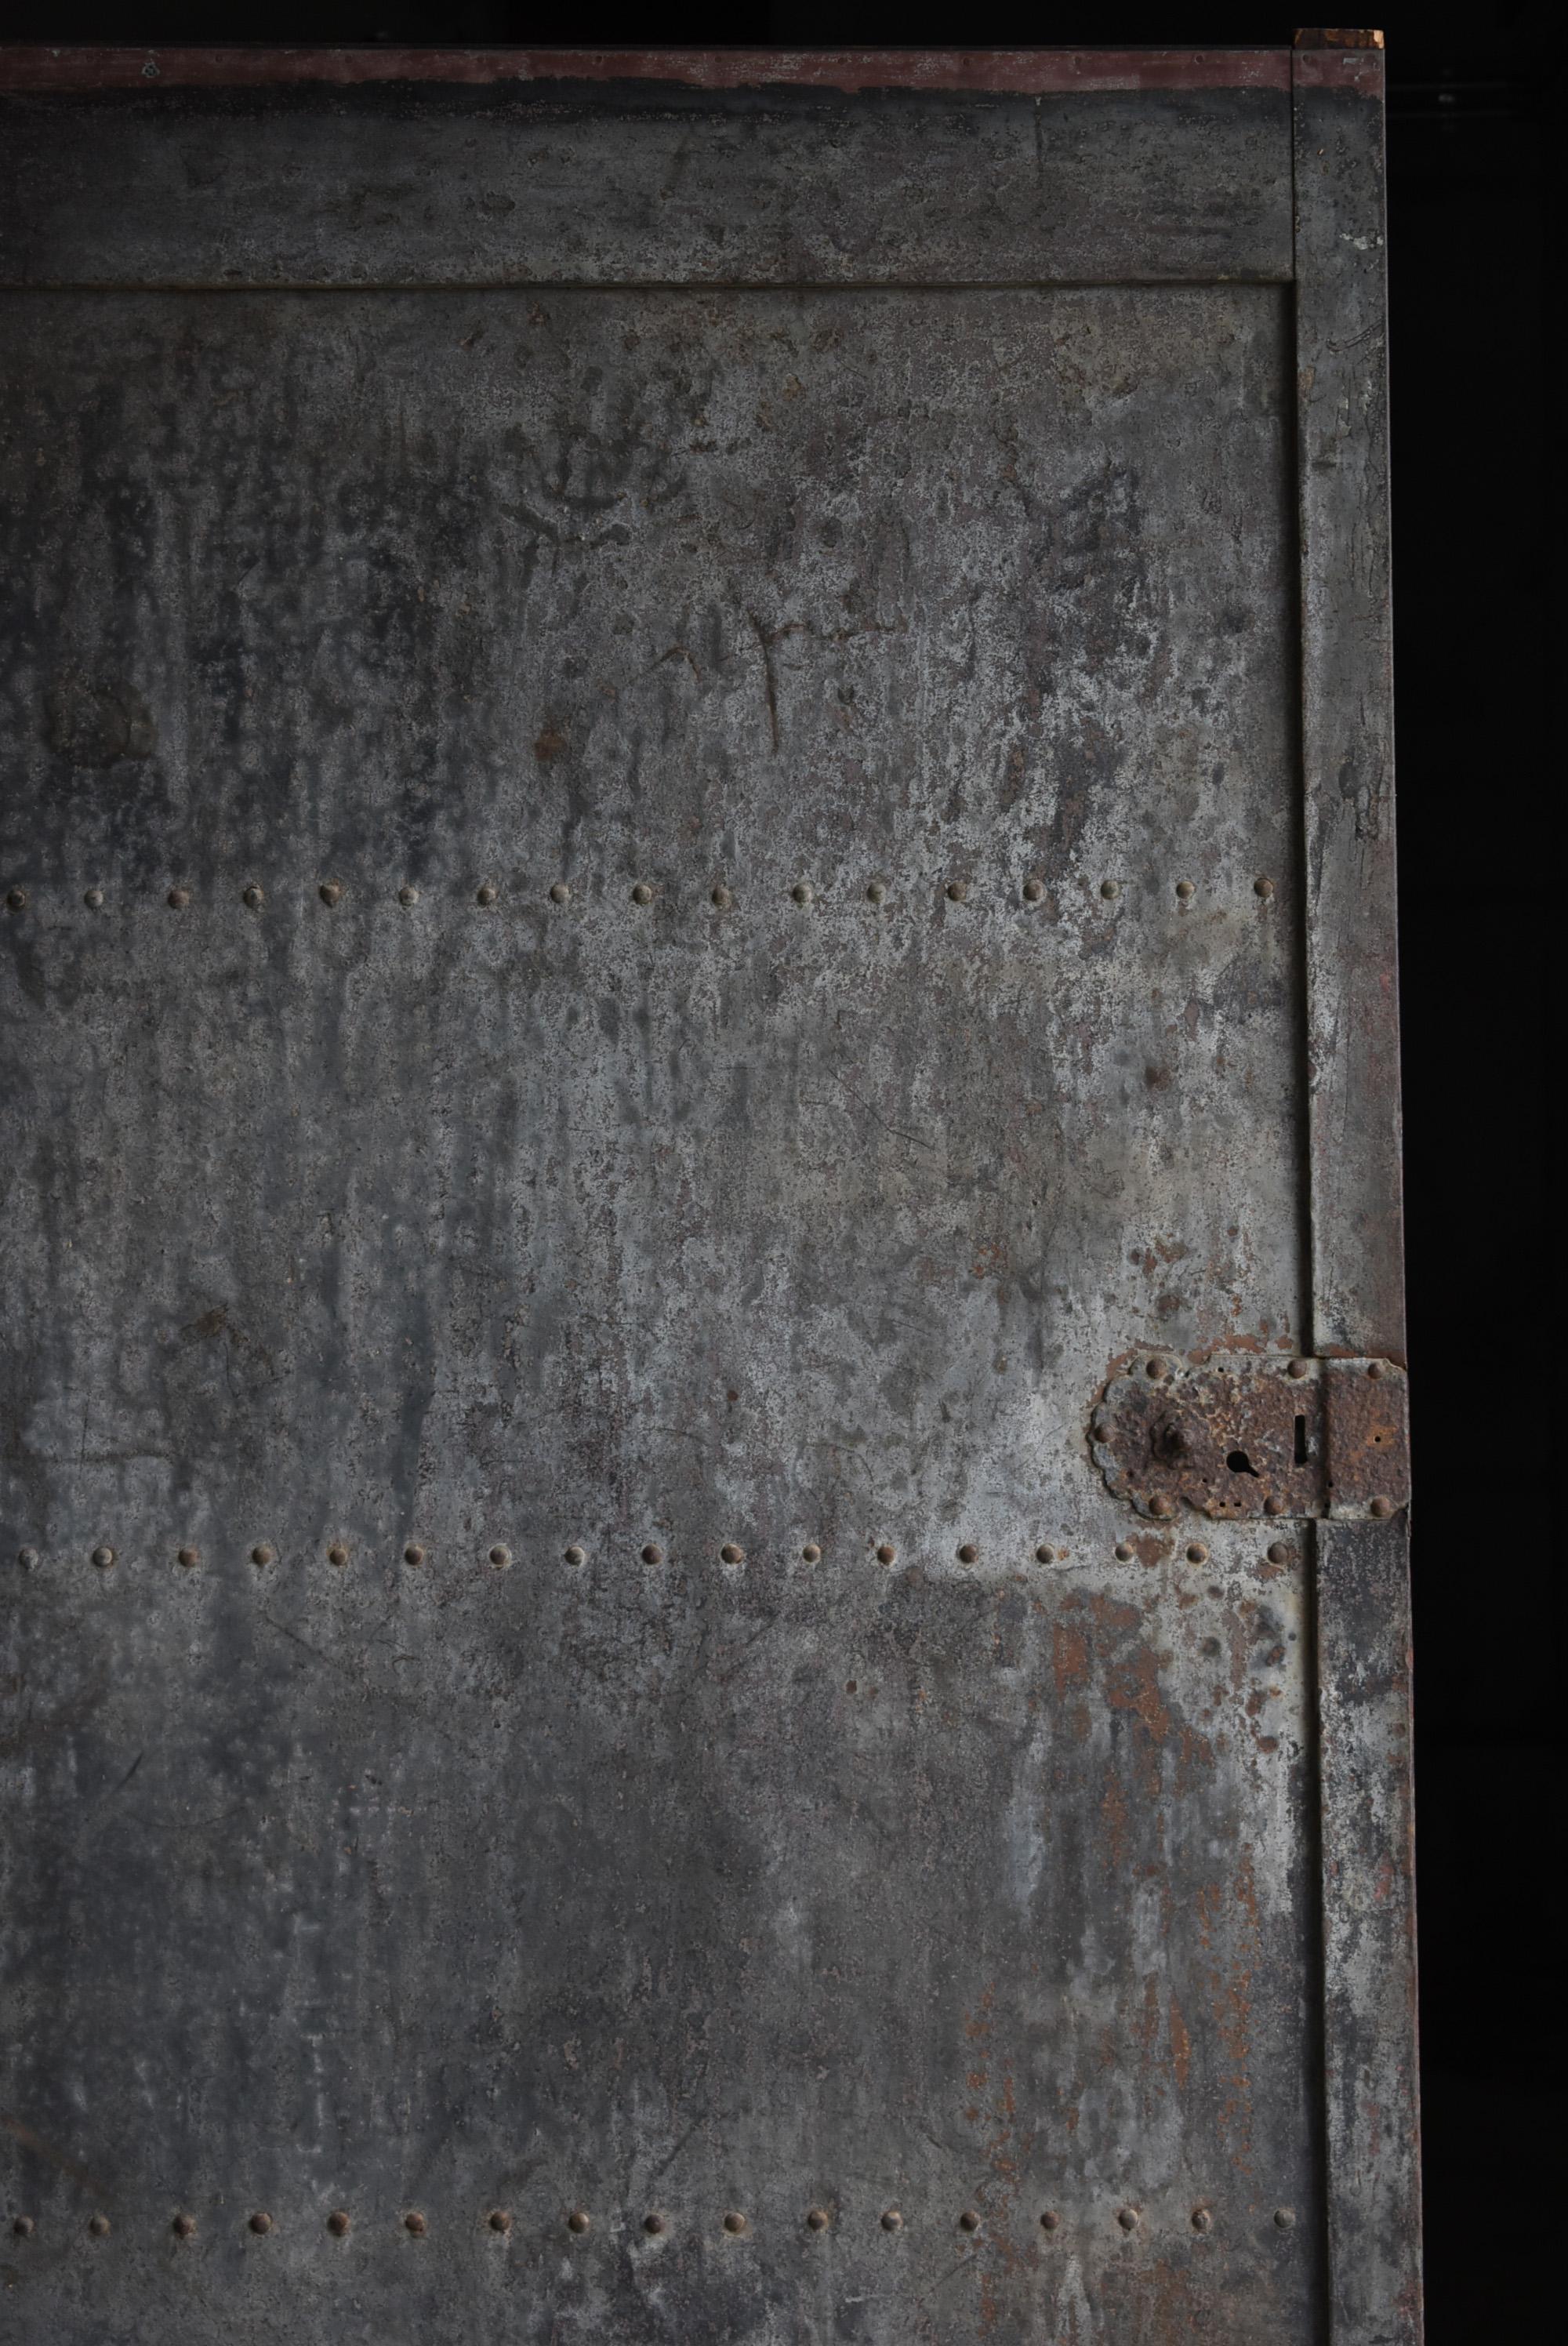 It is an old Japanese door.
It is an item from the Edo period to the Meiji period.
It is made of wood, but has an iron plate on its surface.

It was used as a fitting for the warehouse.

Due to the taste over time, it has a beauty like an